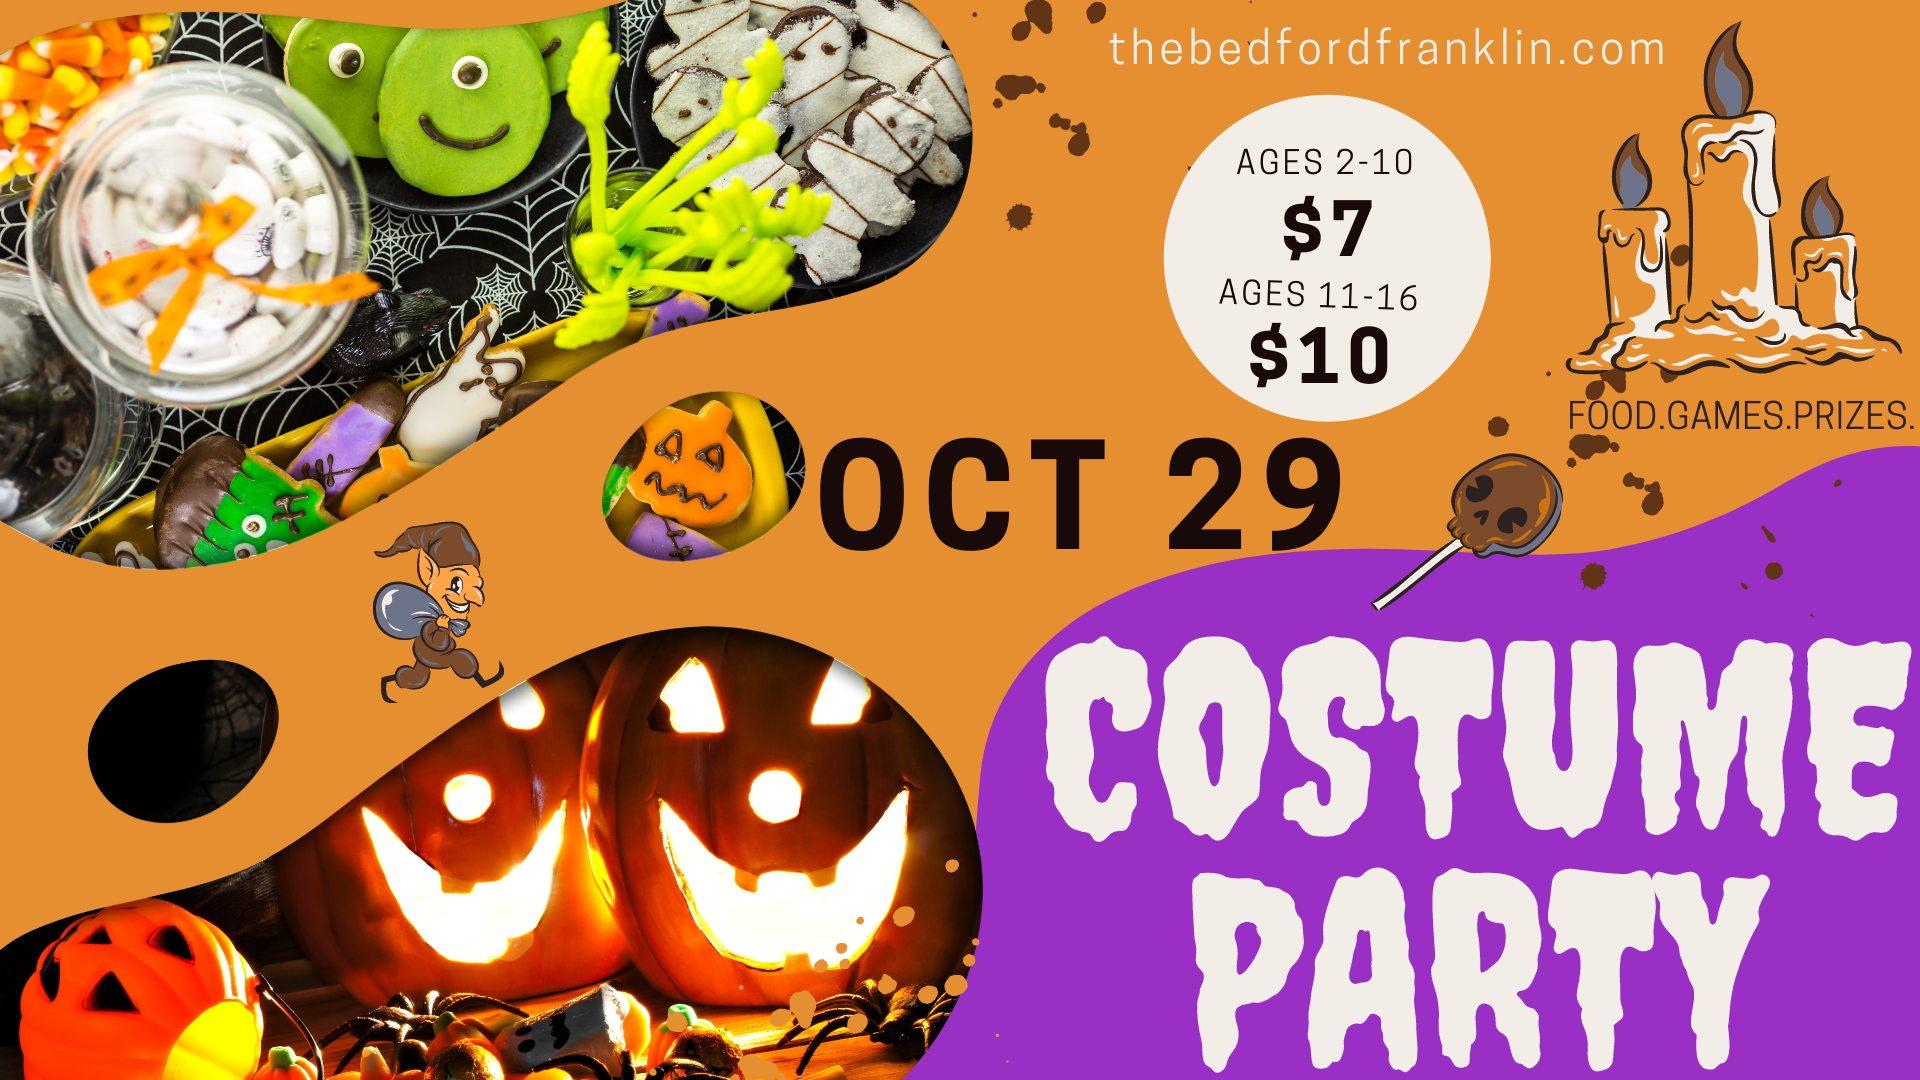 Kids Costume Party
Sat Oct 29, 3:00 PM - Sat Oct 29, 5:30 PM
in 9 days